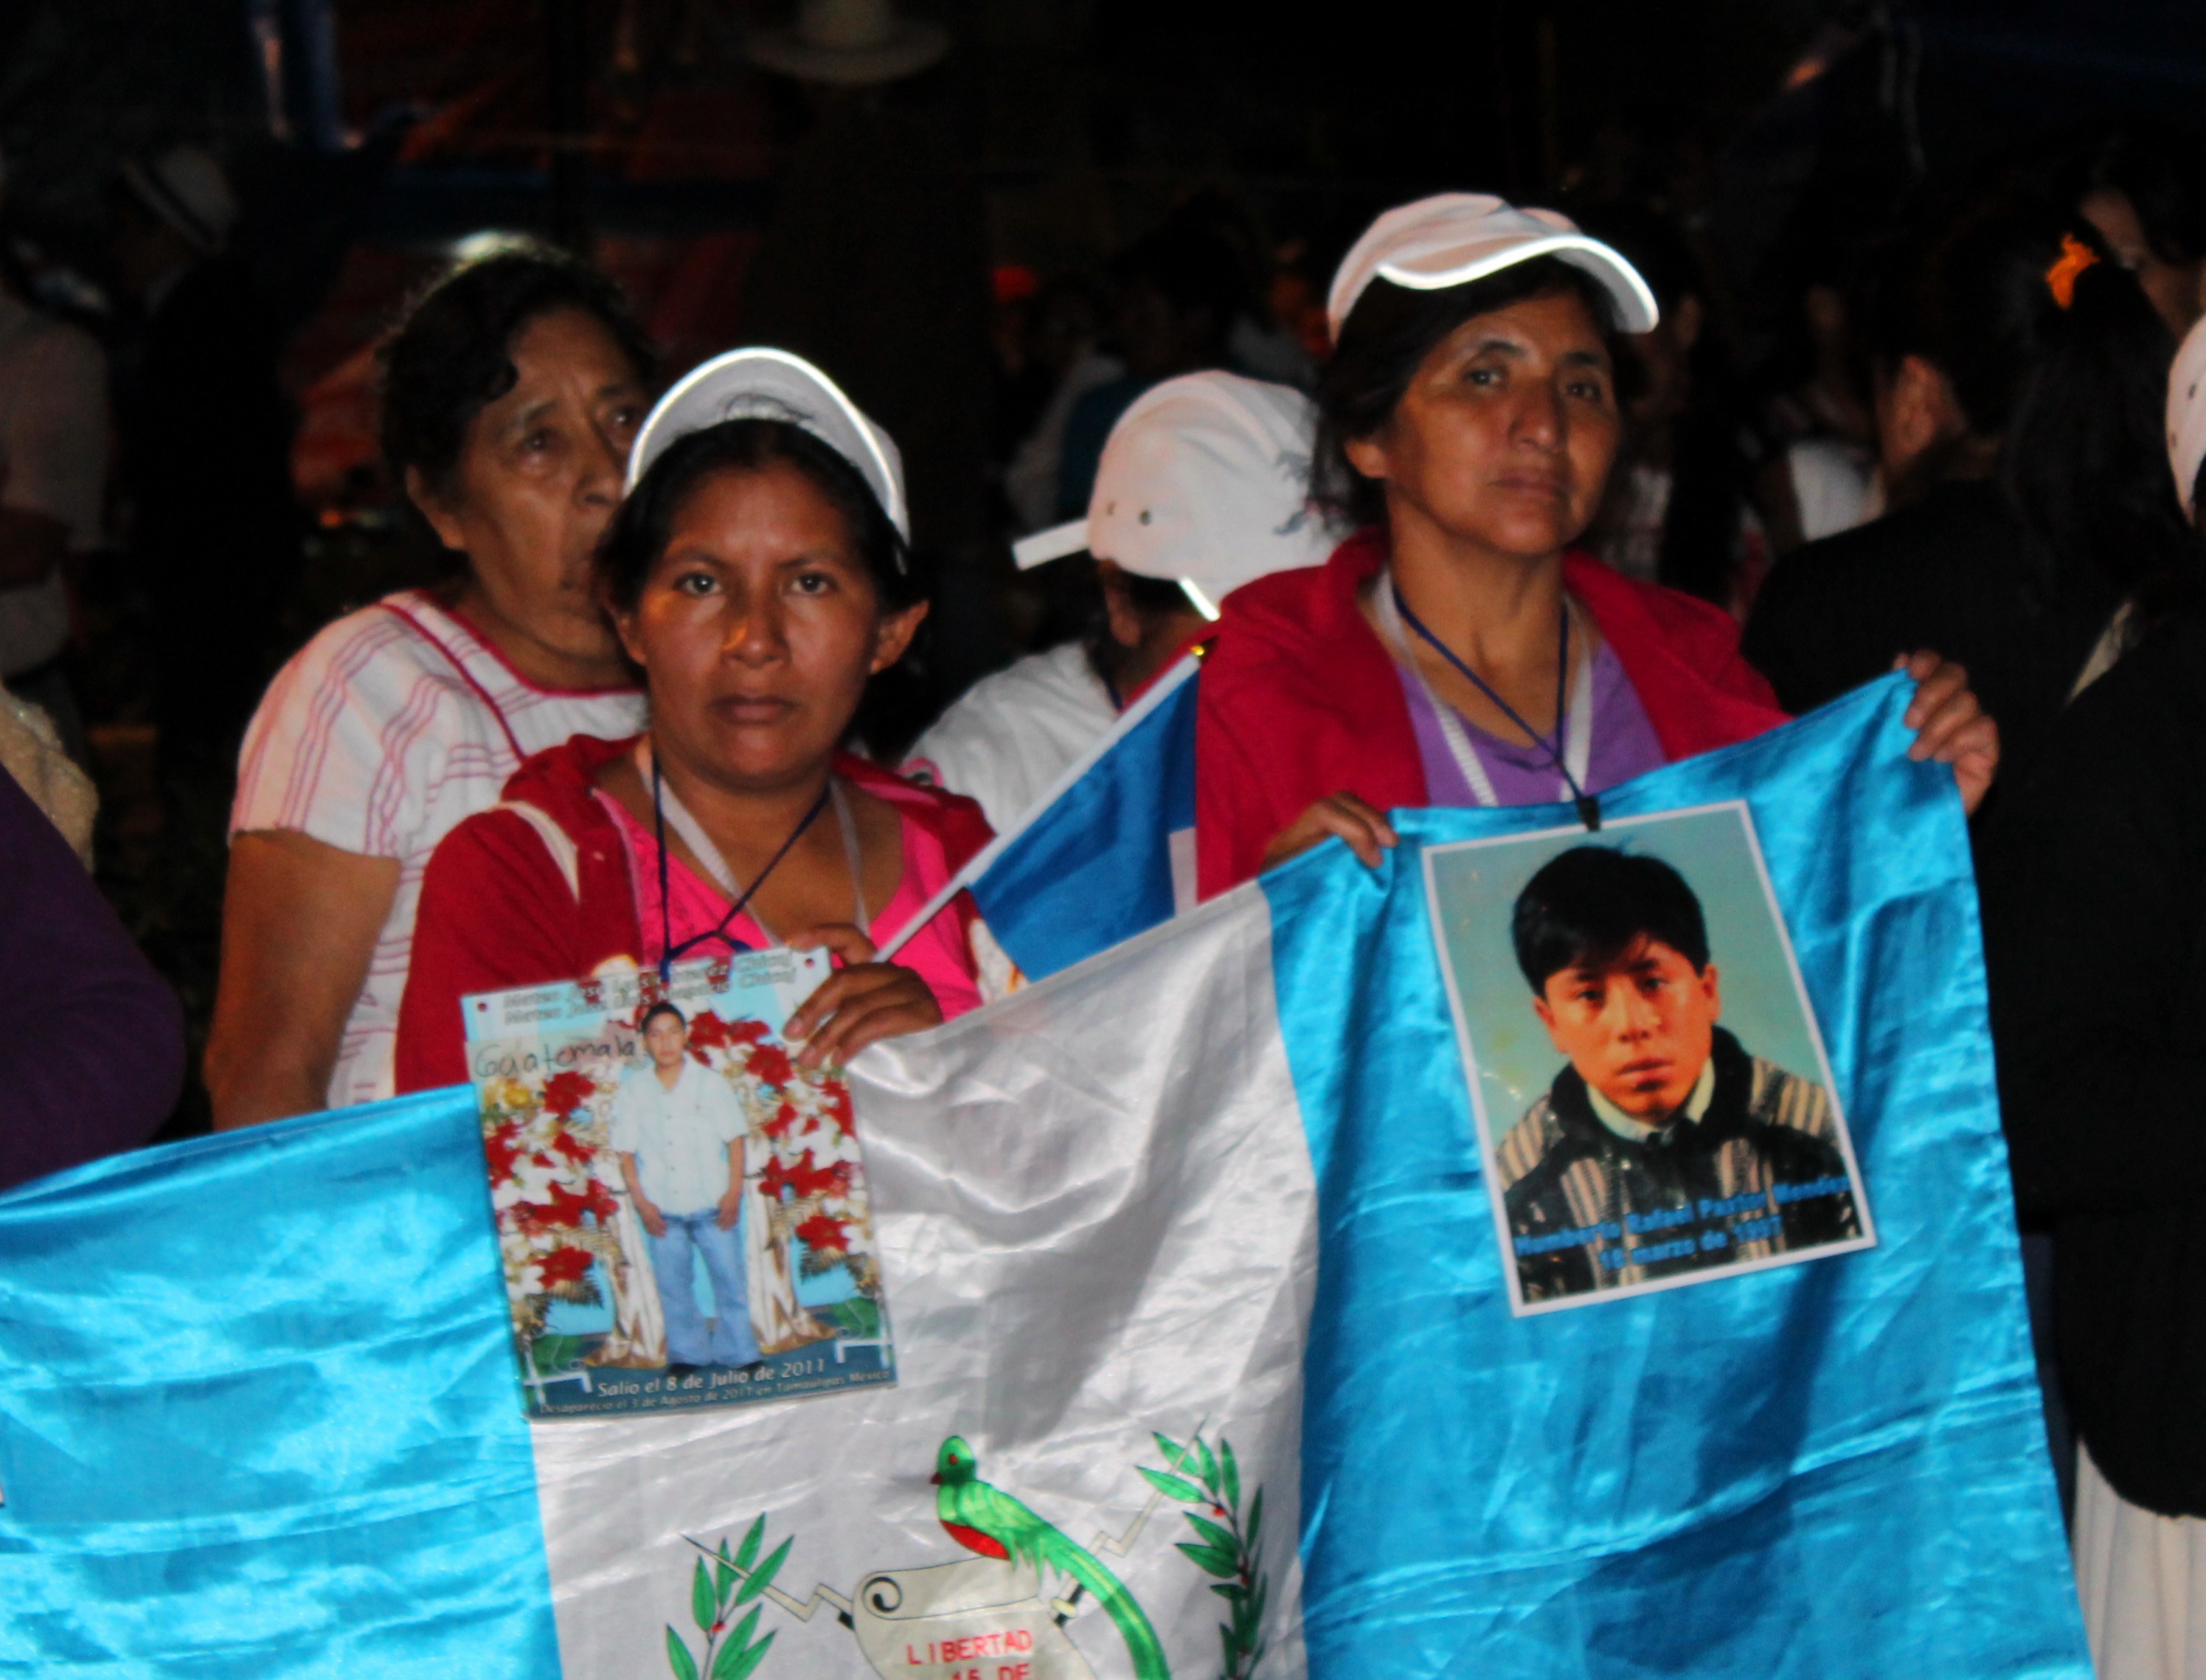 In Oaxaca, Caravan of Central American Mothers Calls for Unity of Movements